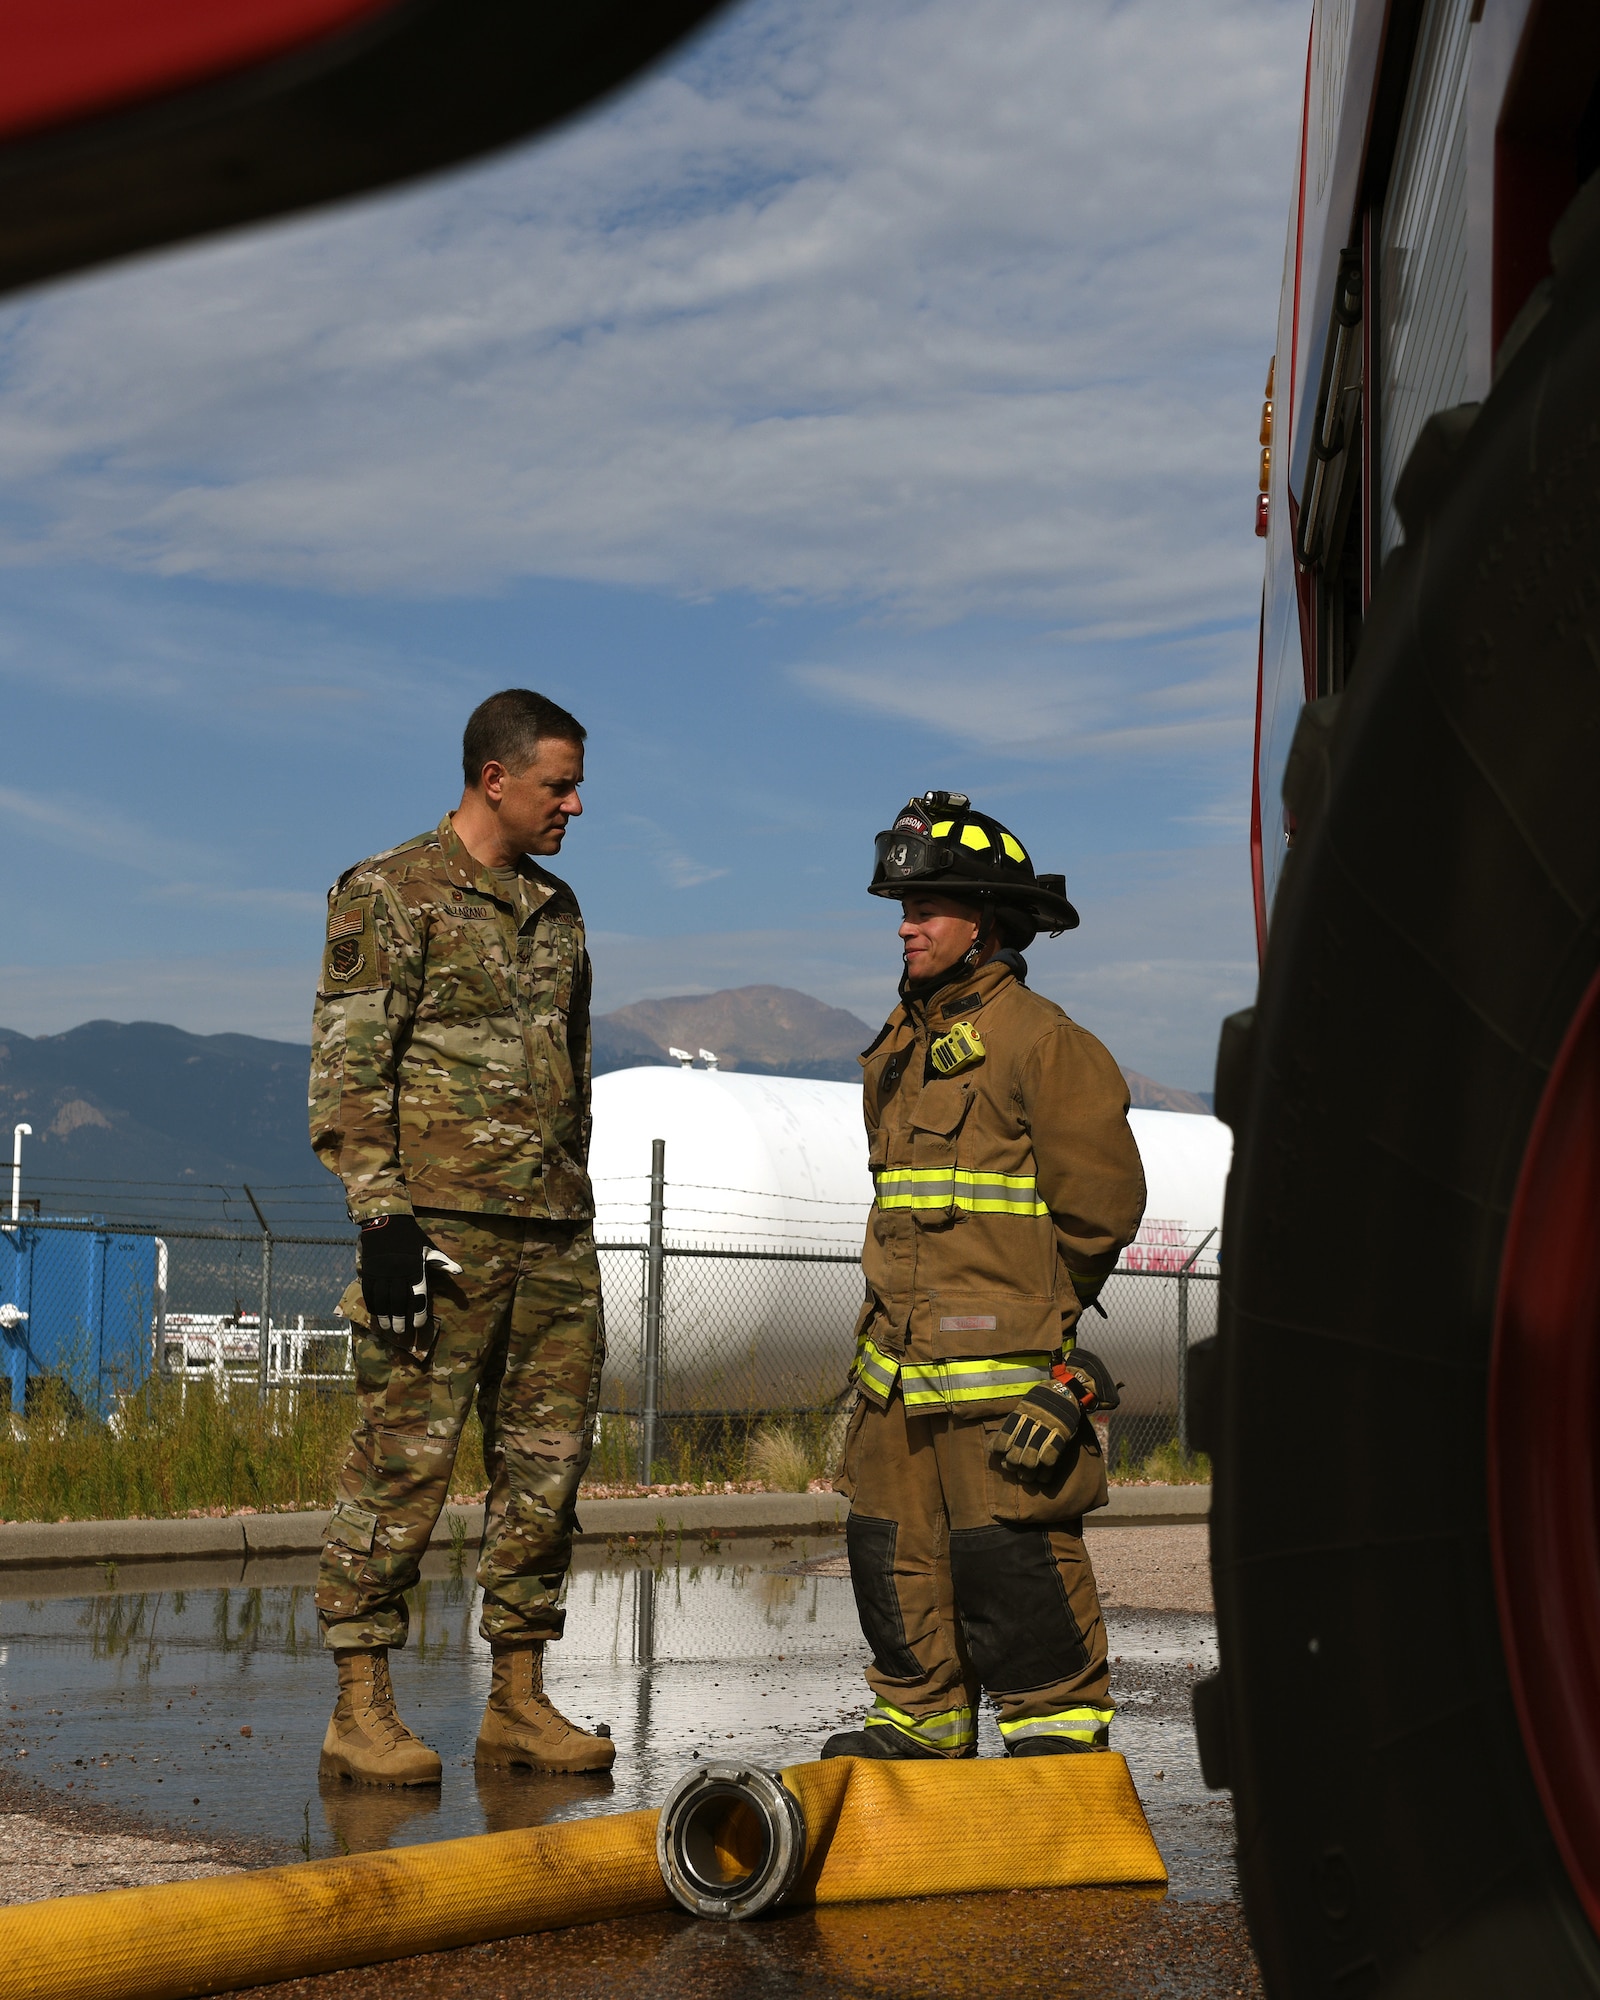 Col. Thomas Falzarano, 21st Space Wing commander, left, talks with Senior Airman Paul Karasiewicz, a 21st Civil Engineer Squadron firefighter Aug. 7, 2019, on Peterson Air Force Base, Colorado. Falzarano, as part of a tour of the 21st CES, met the many Airmen in the squadron and learned about what they do everyday. (U.S. Air Force photo by Airman 1st Class Andrew Bertain)